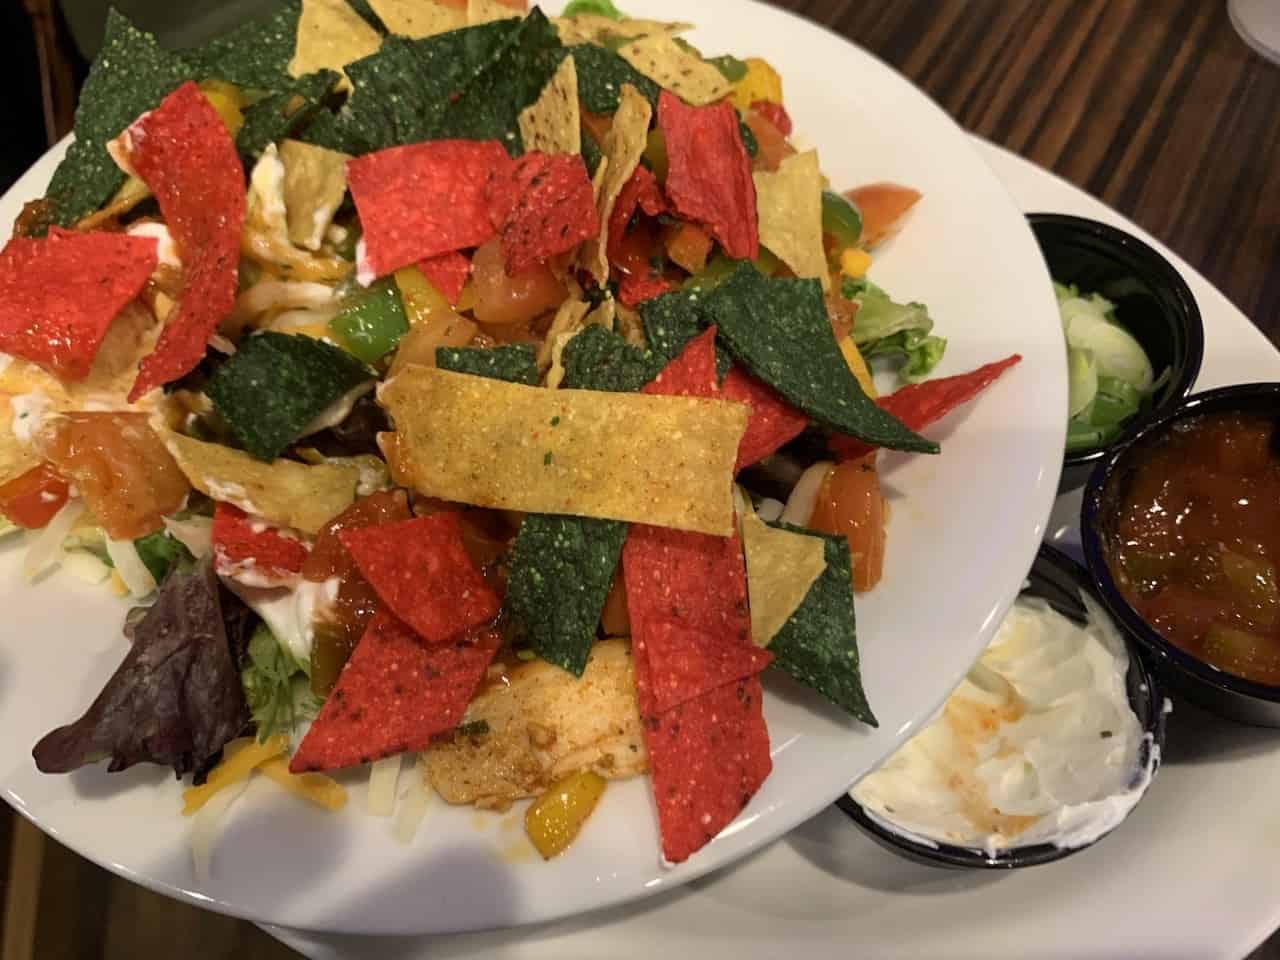 Taco Salad With Chicken - This colourful Taco Salad topped with chicken, was another tasty selection from Horsethief Creek Pub & Eatery's menu in Radium Hot Springs, British Columbia.